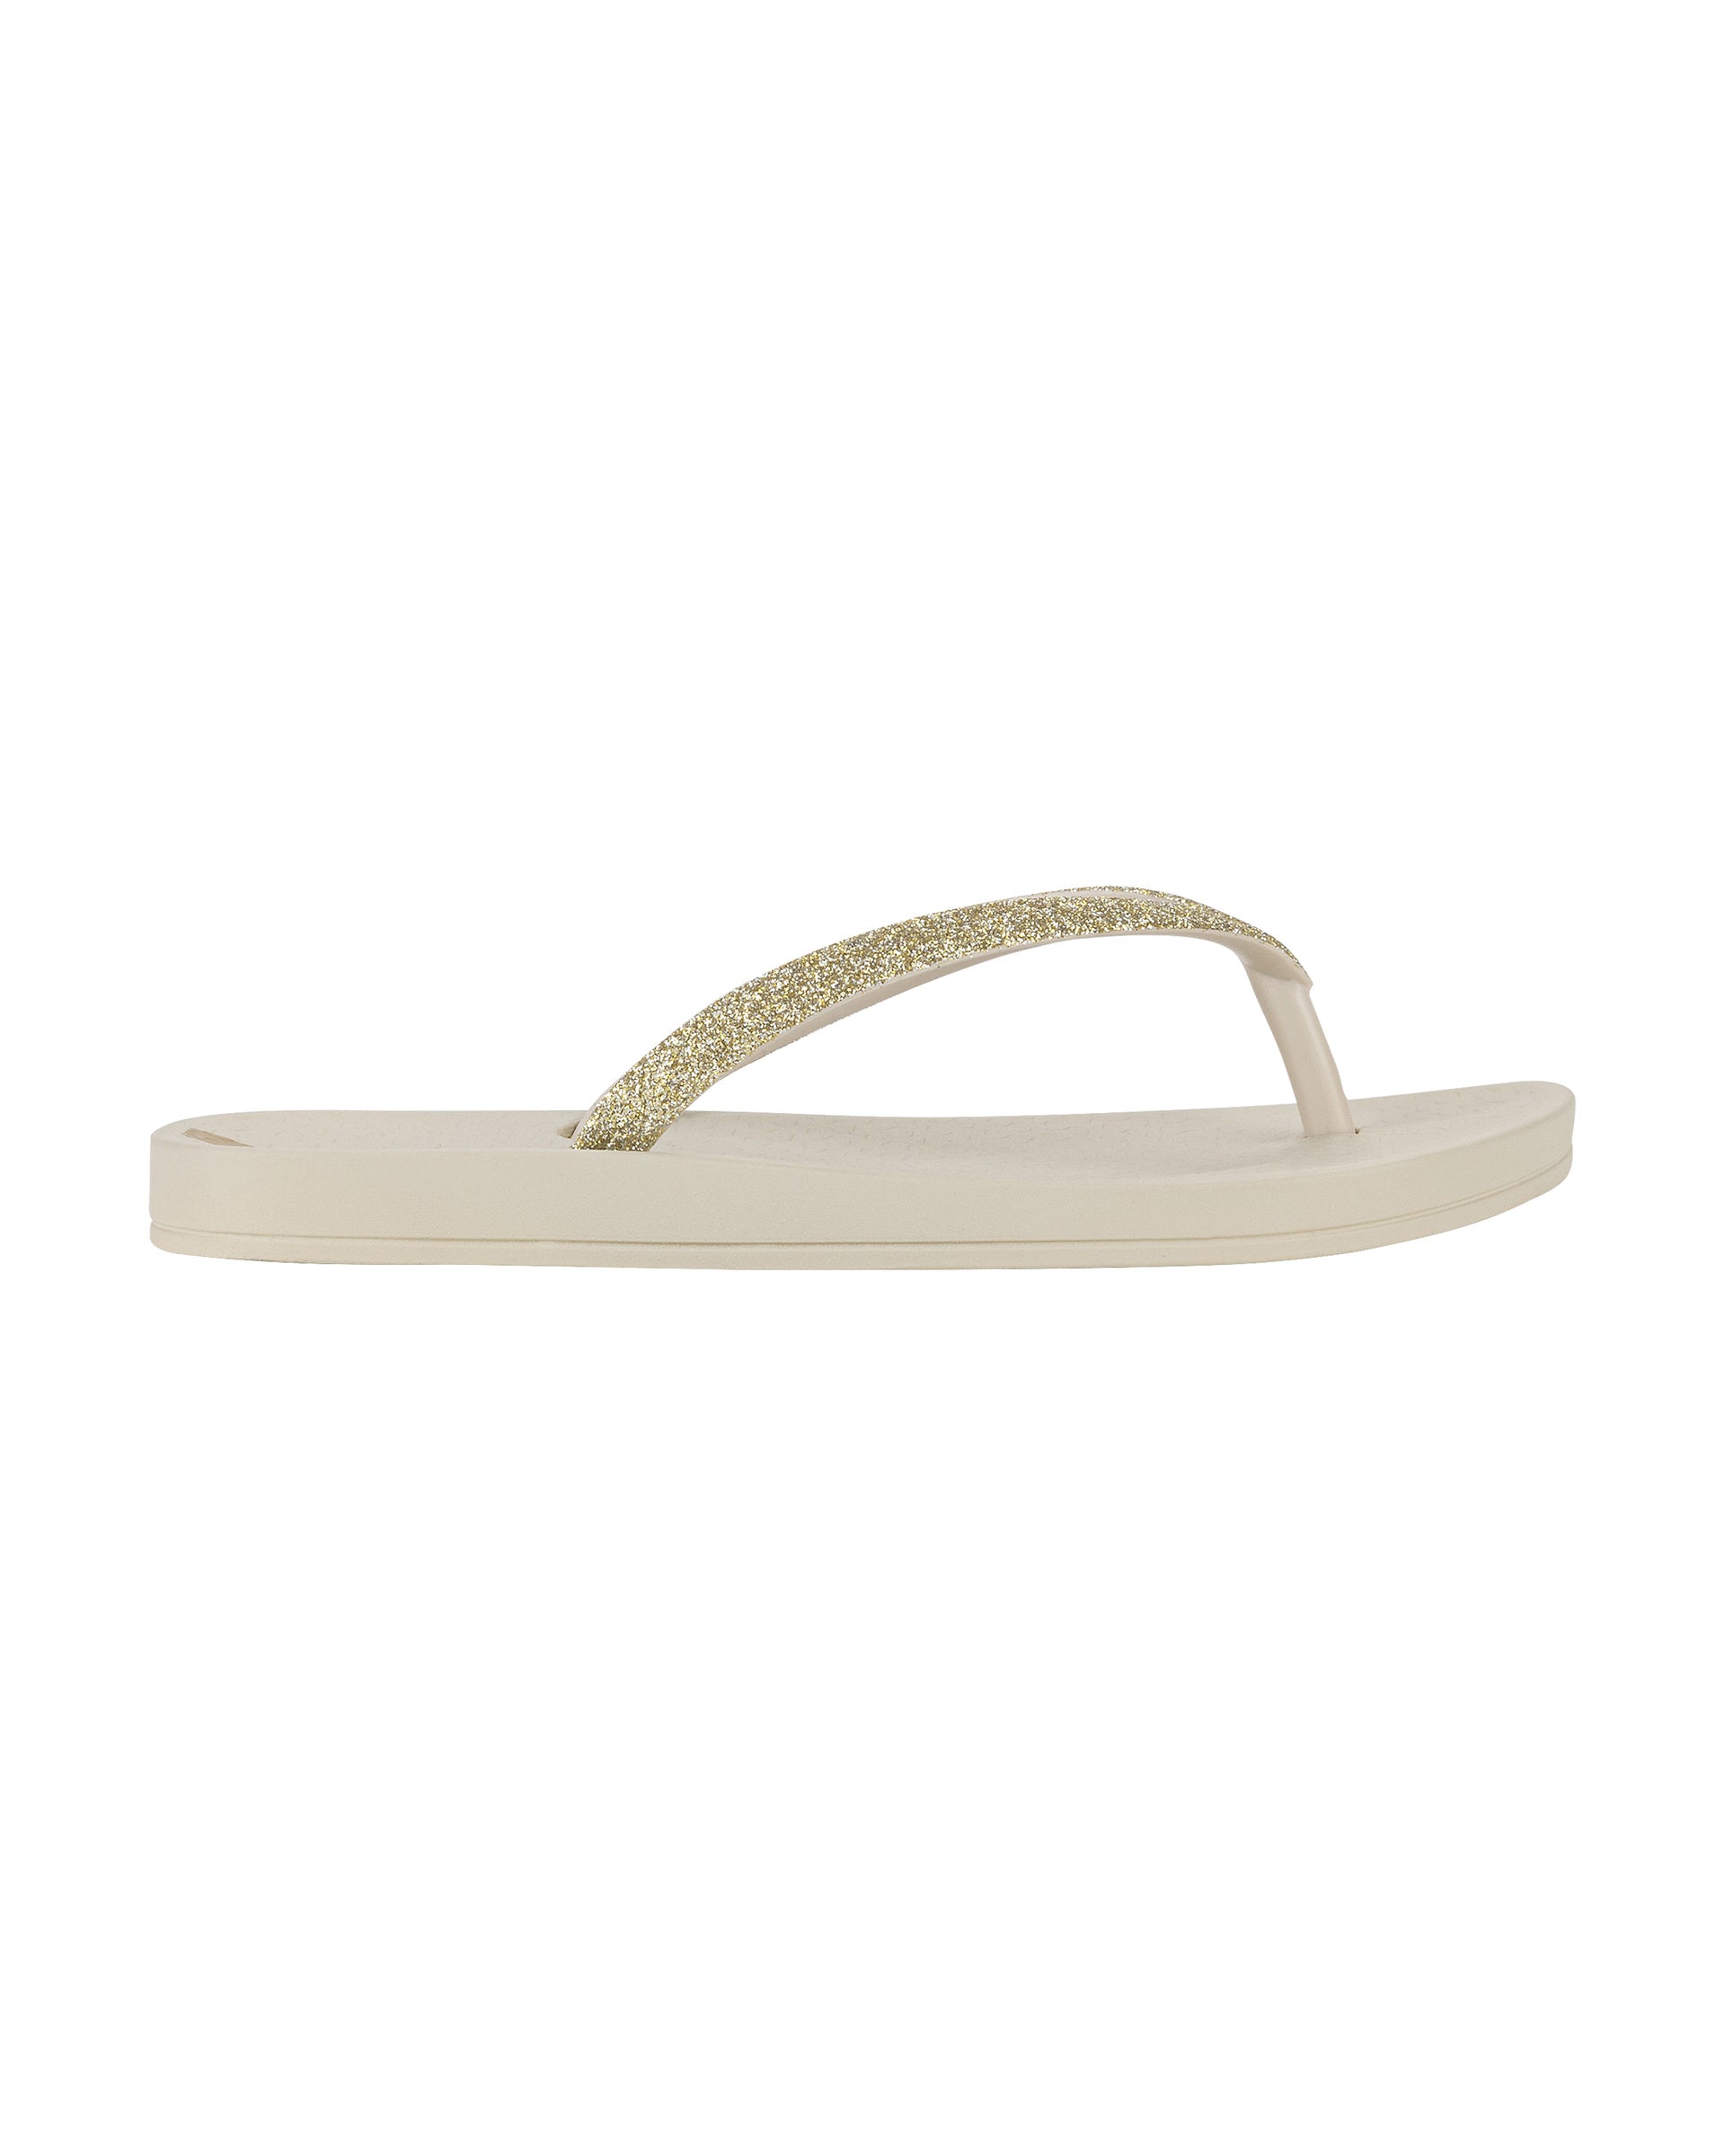 Outer side view of a beige Ipanema Ana Sparkle kids flip flop with gold glitter strap.